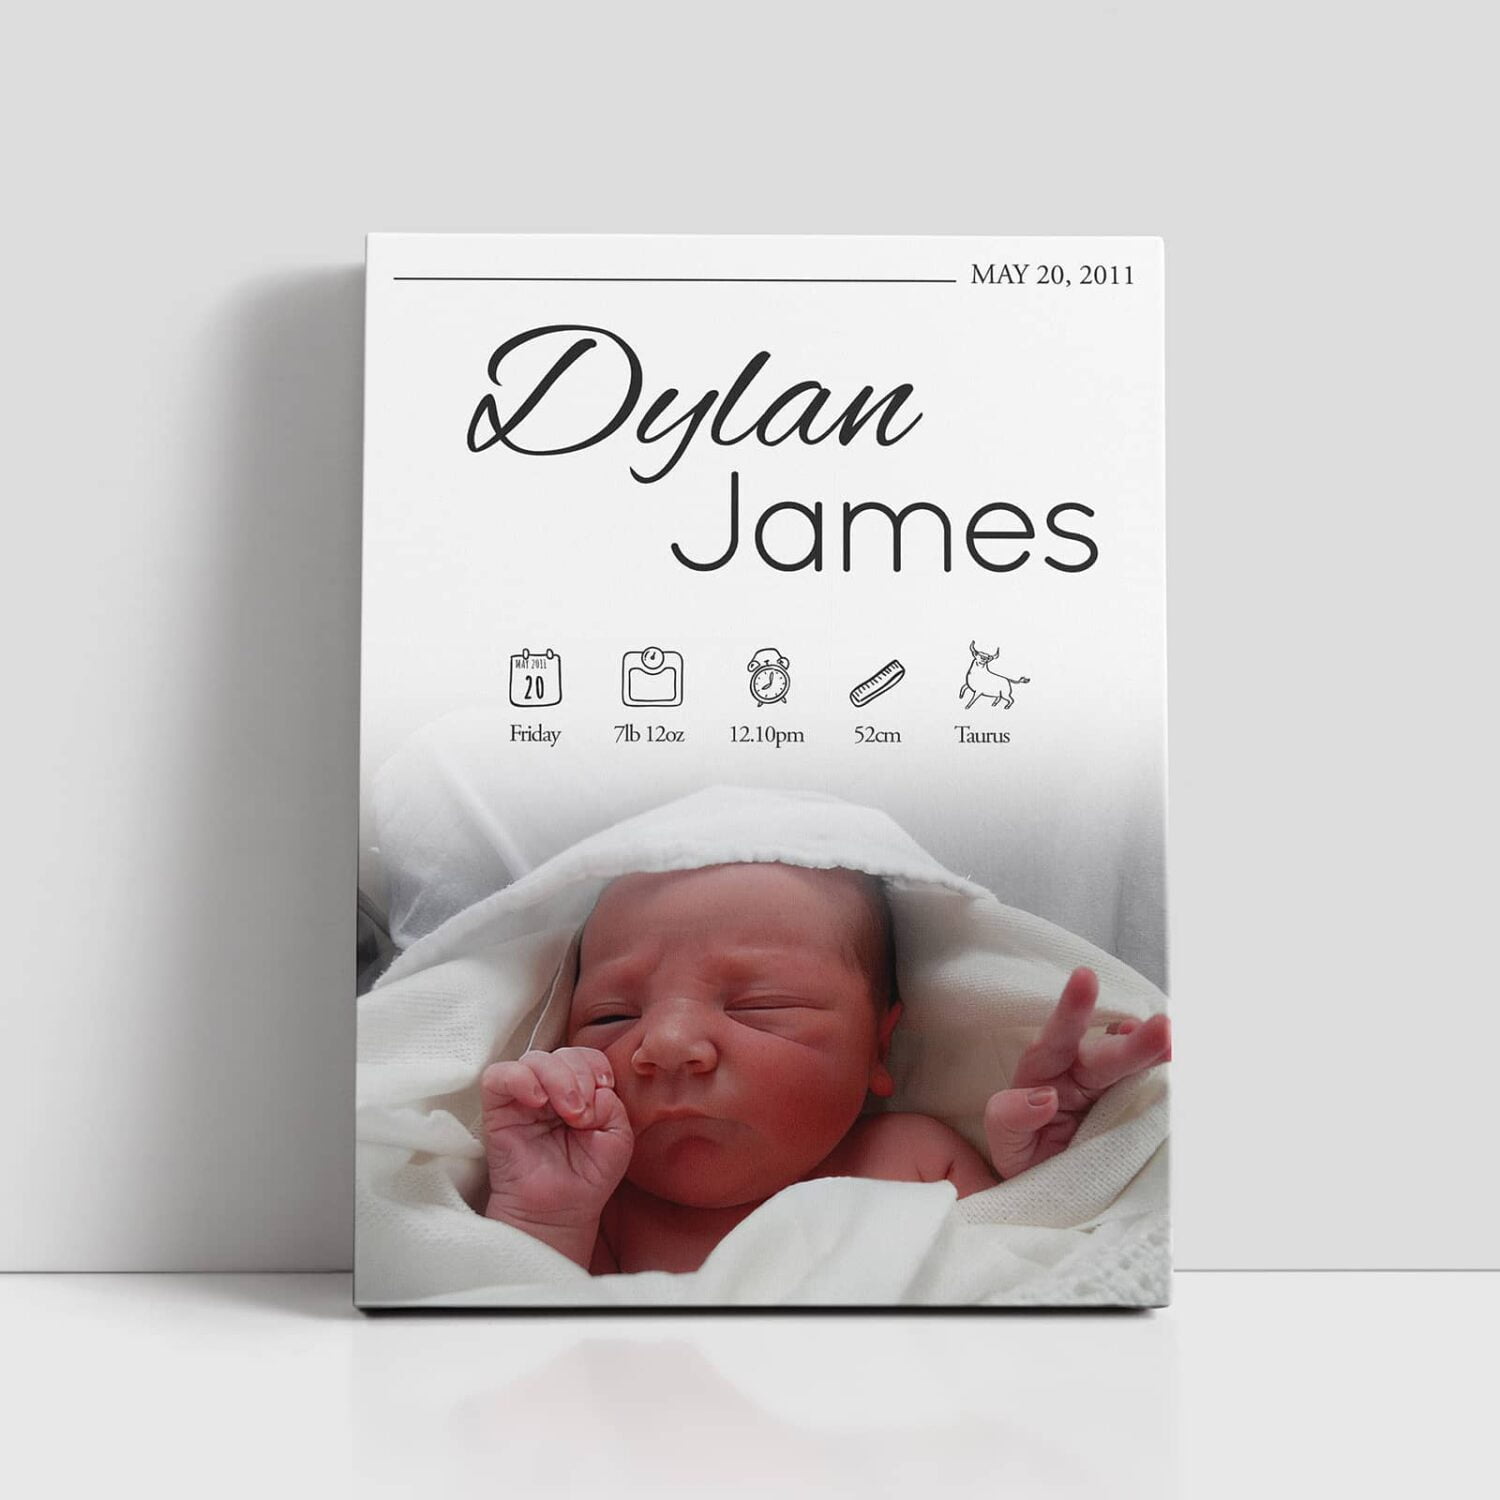 Personalised Newborn poster that features a photo of the baby as well as the time of birth, birth weight, time and birth date. Printing in County Monaghan, Ireland by Design Gaff